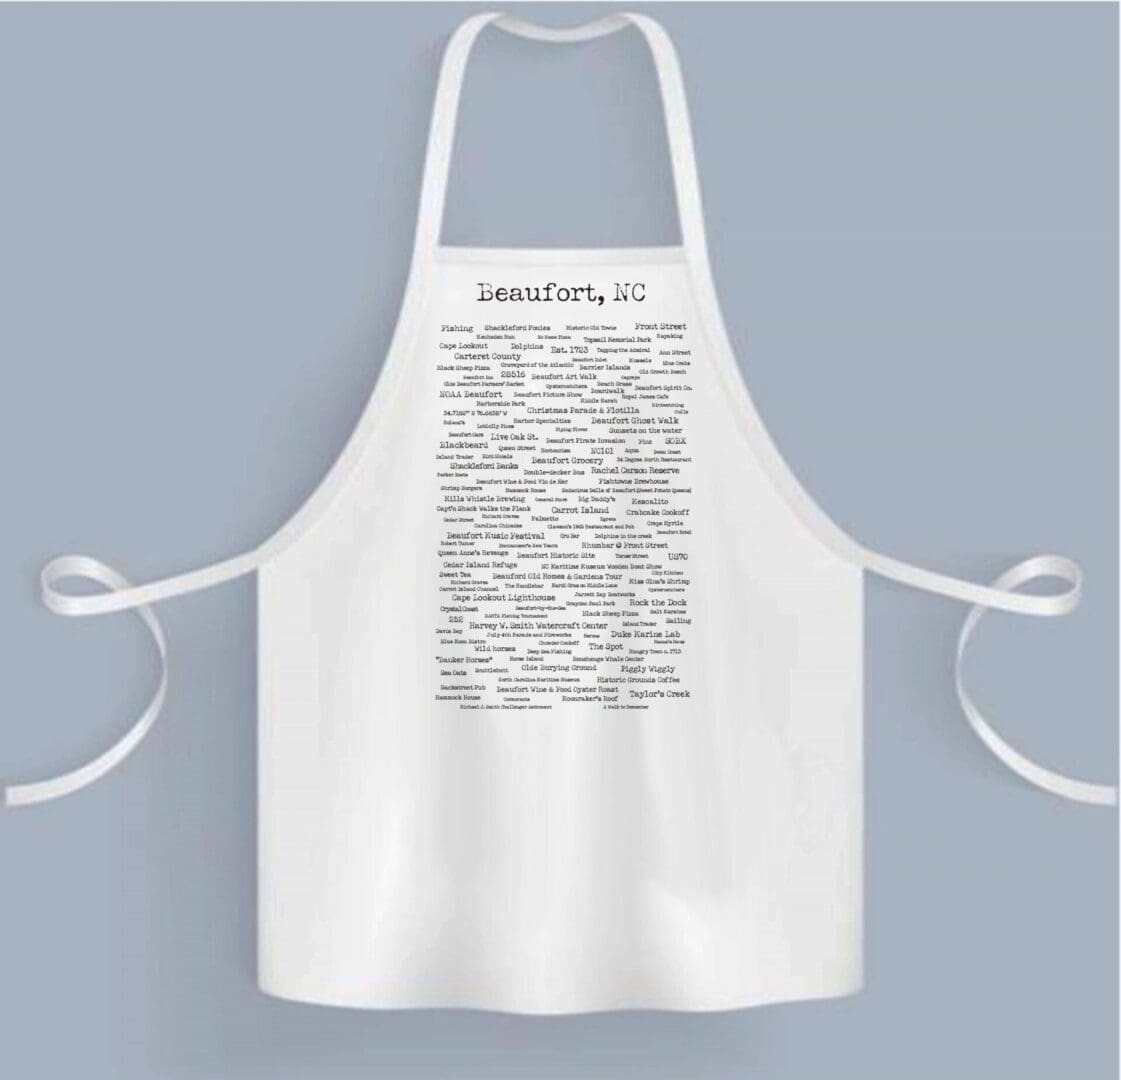 A white apron with some writing on it